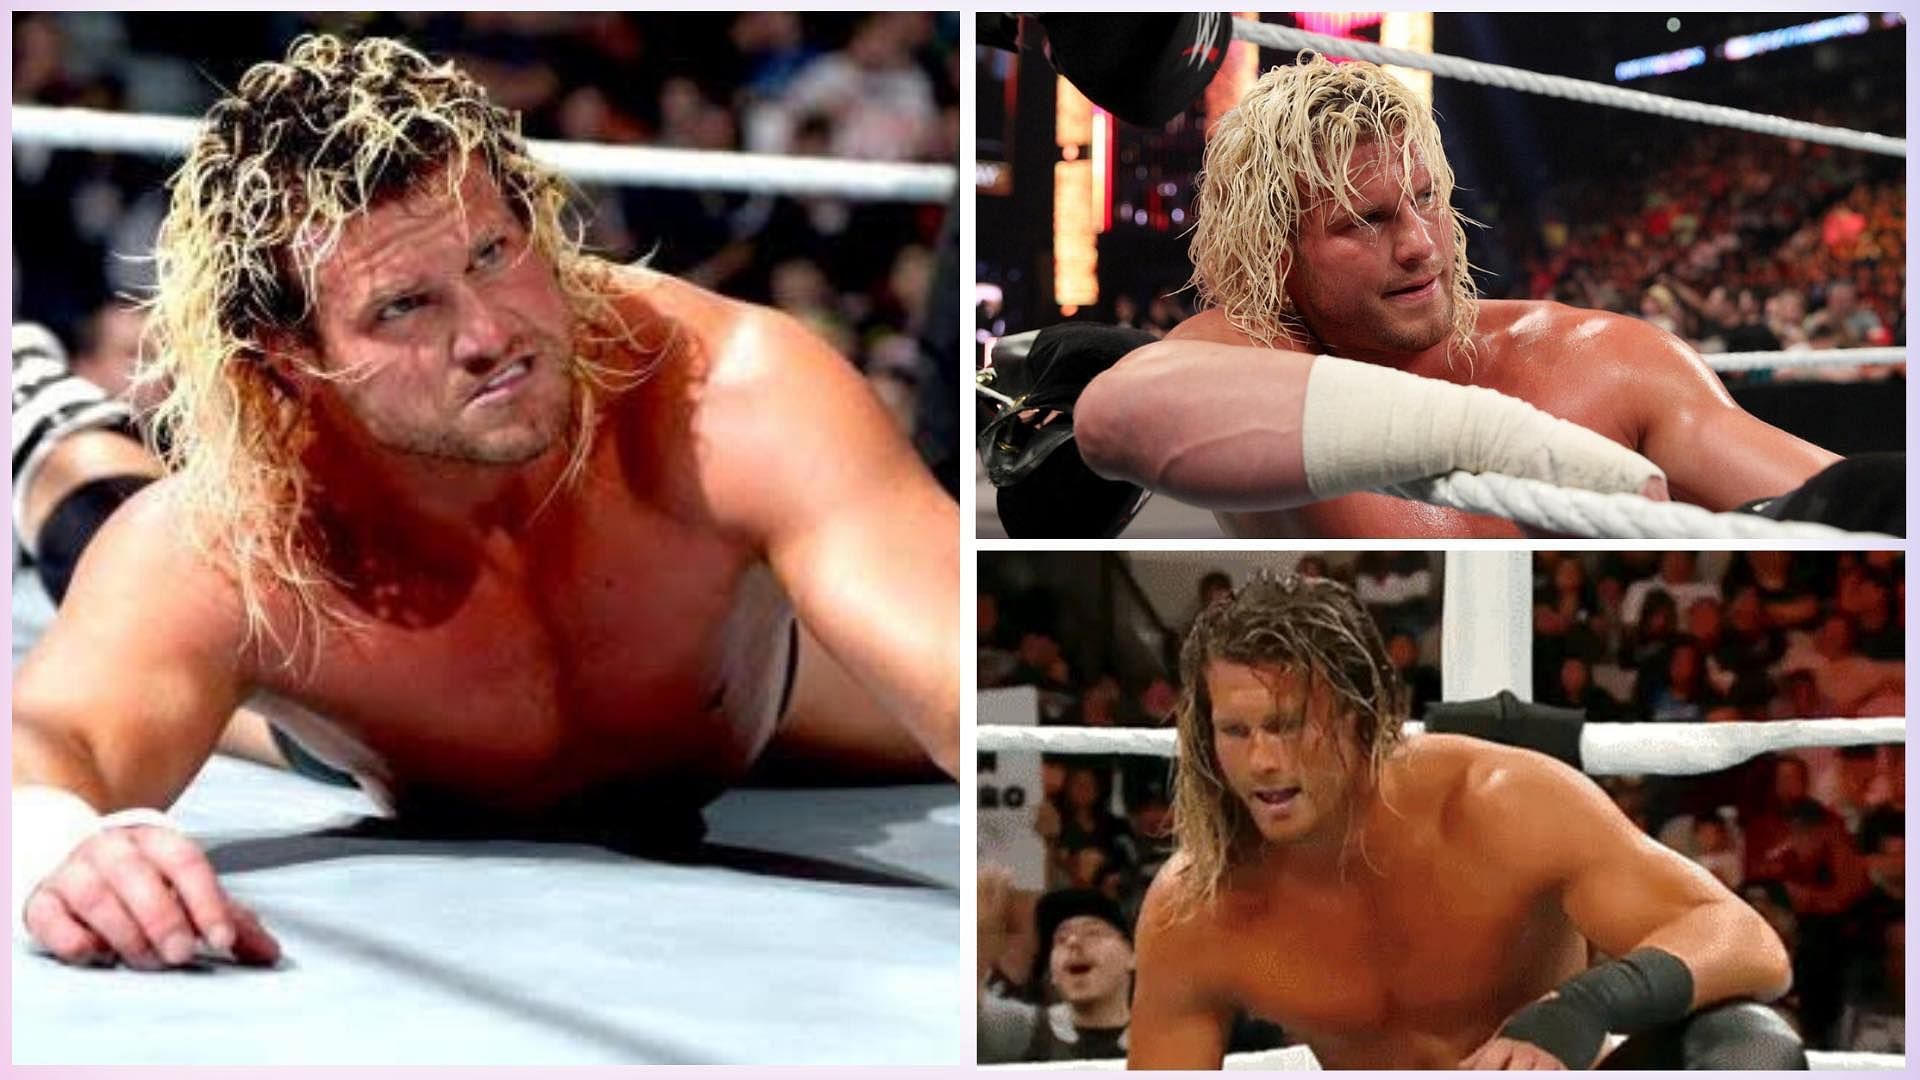 Dolph Ziggler is a grand slam champion in WWE.